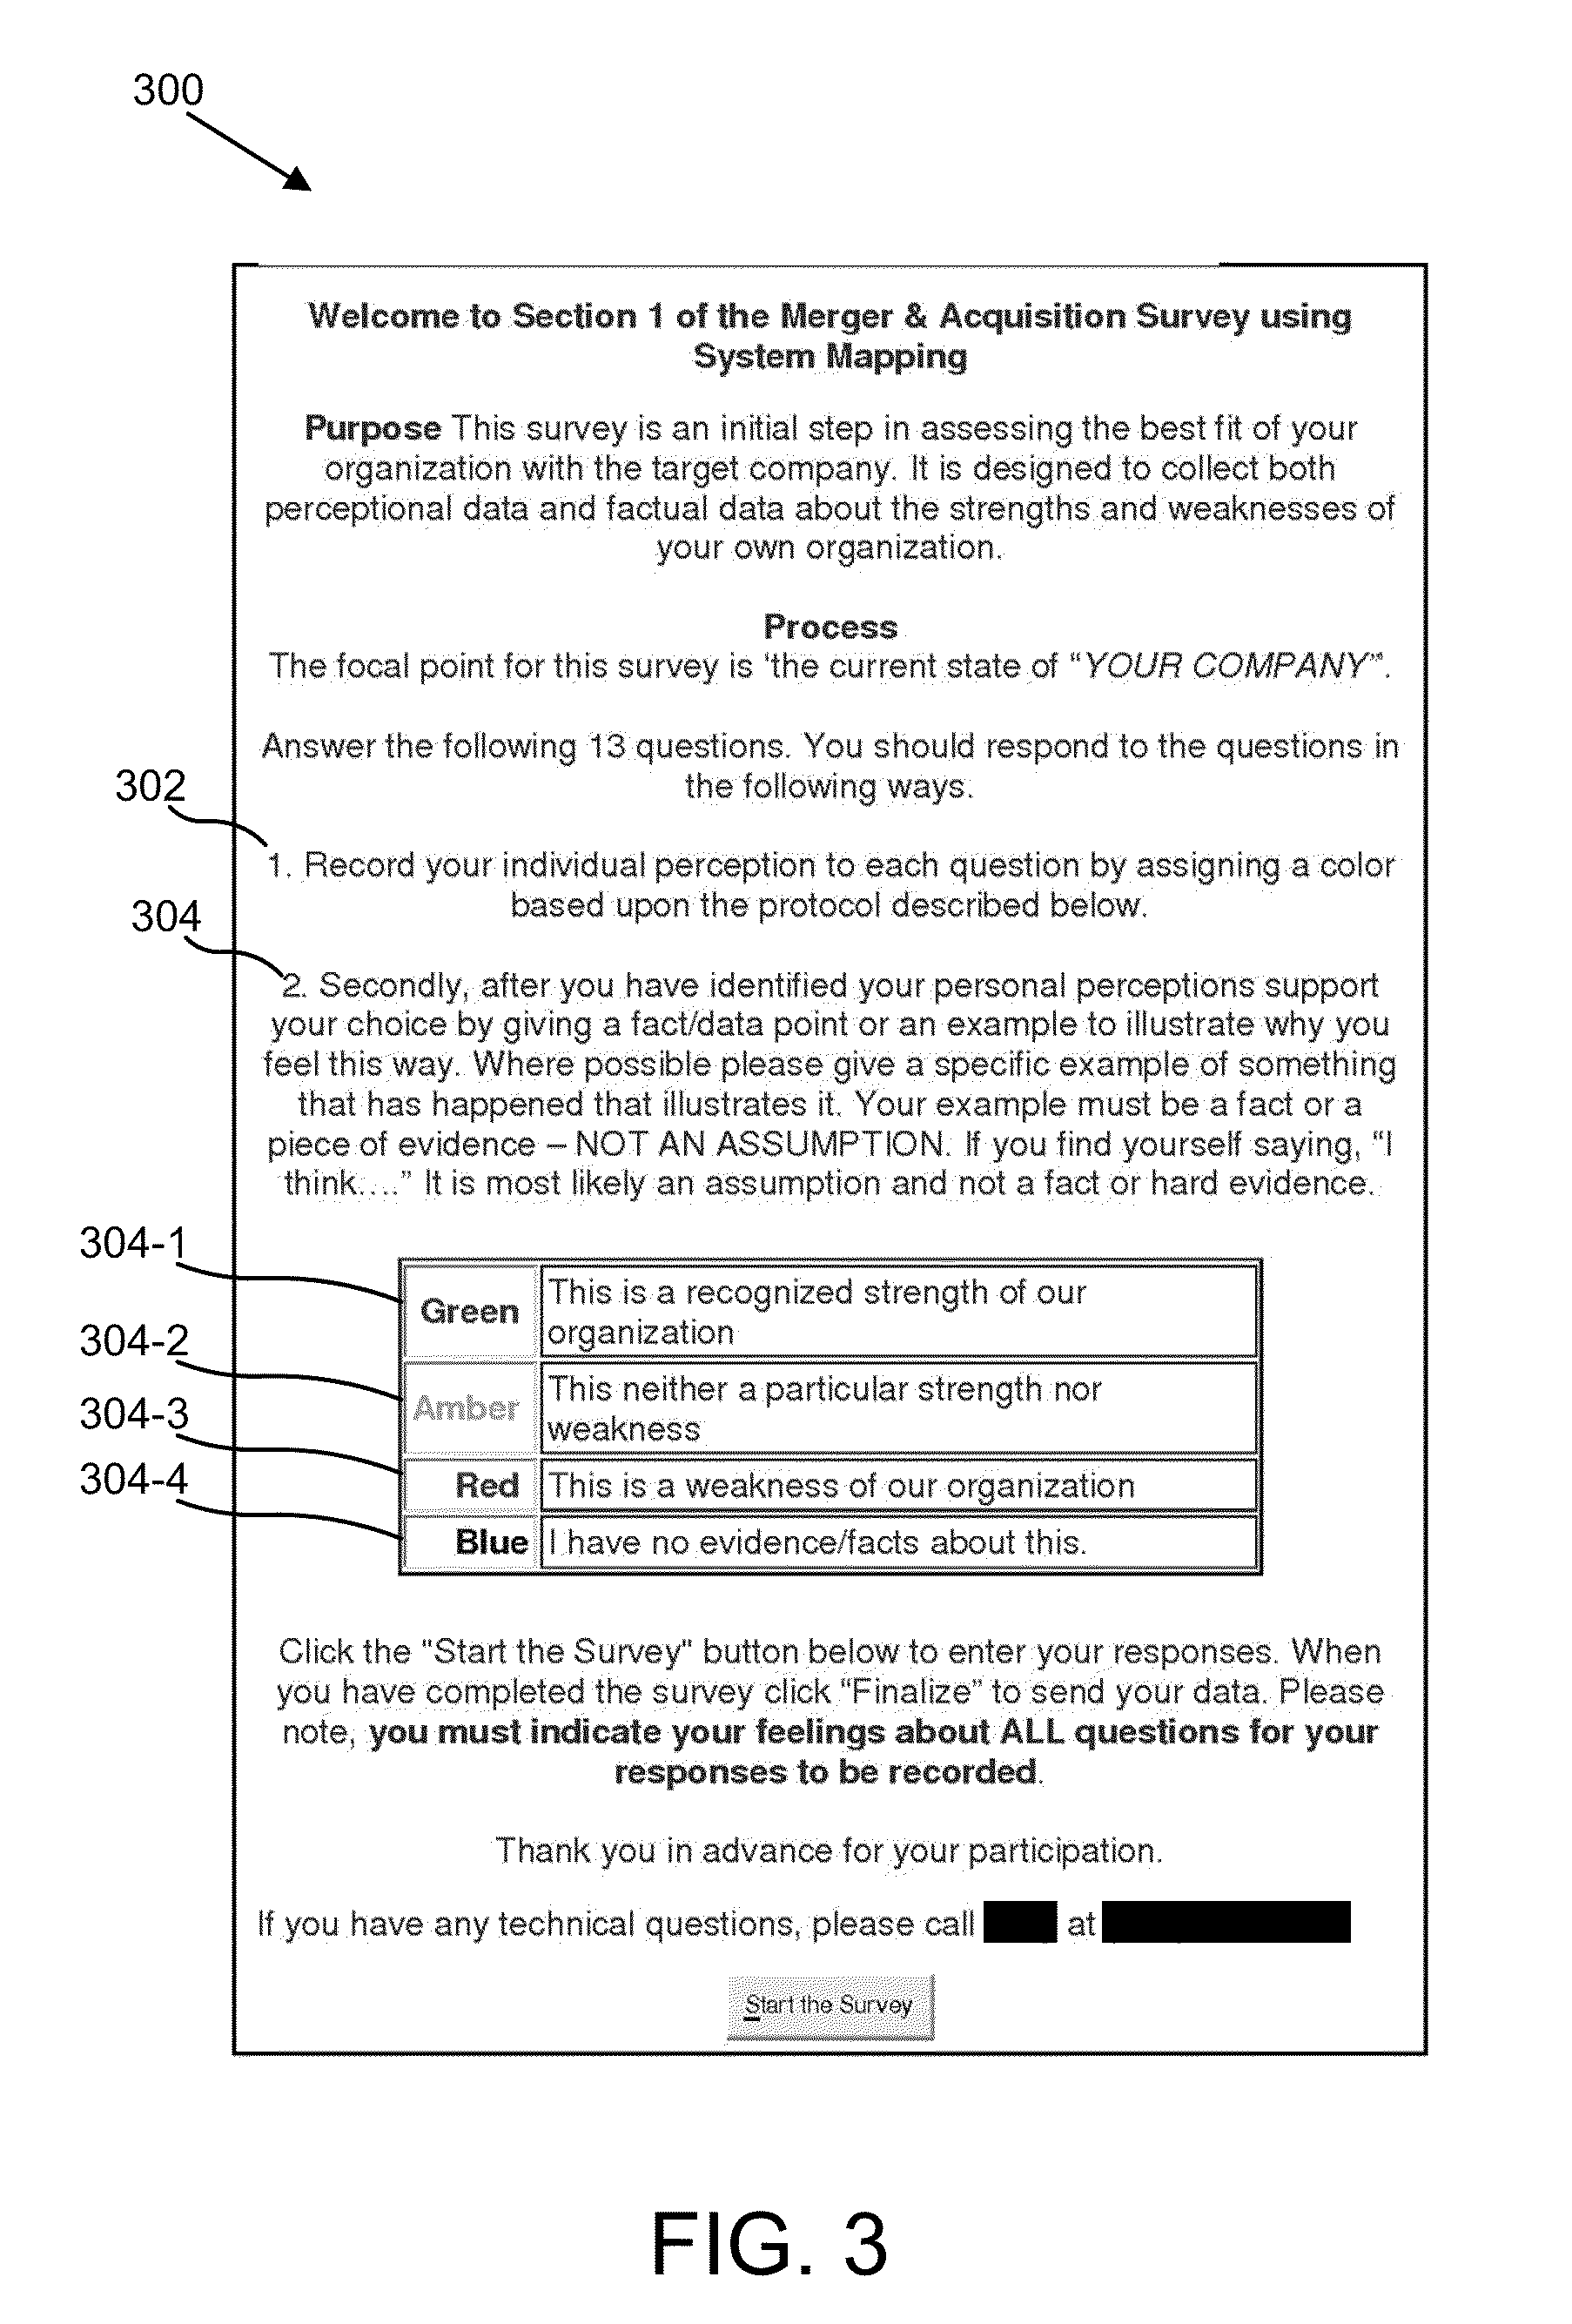 Apparatus, system, and method for organizational merger and acquisition analysis